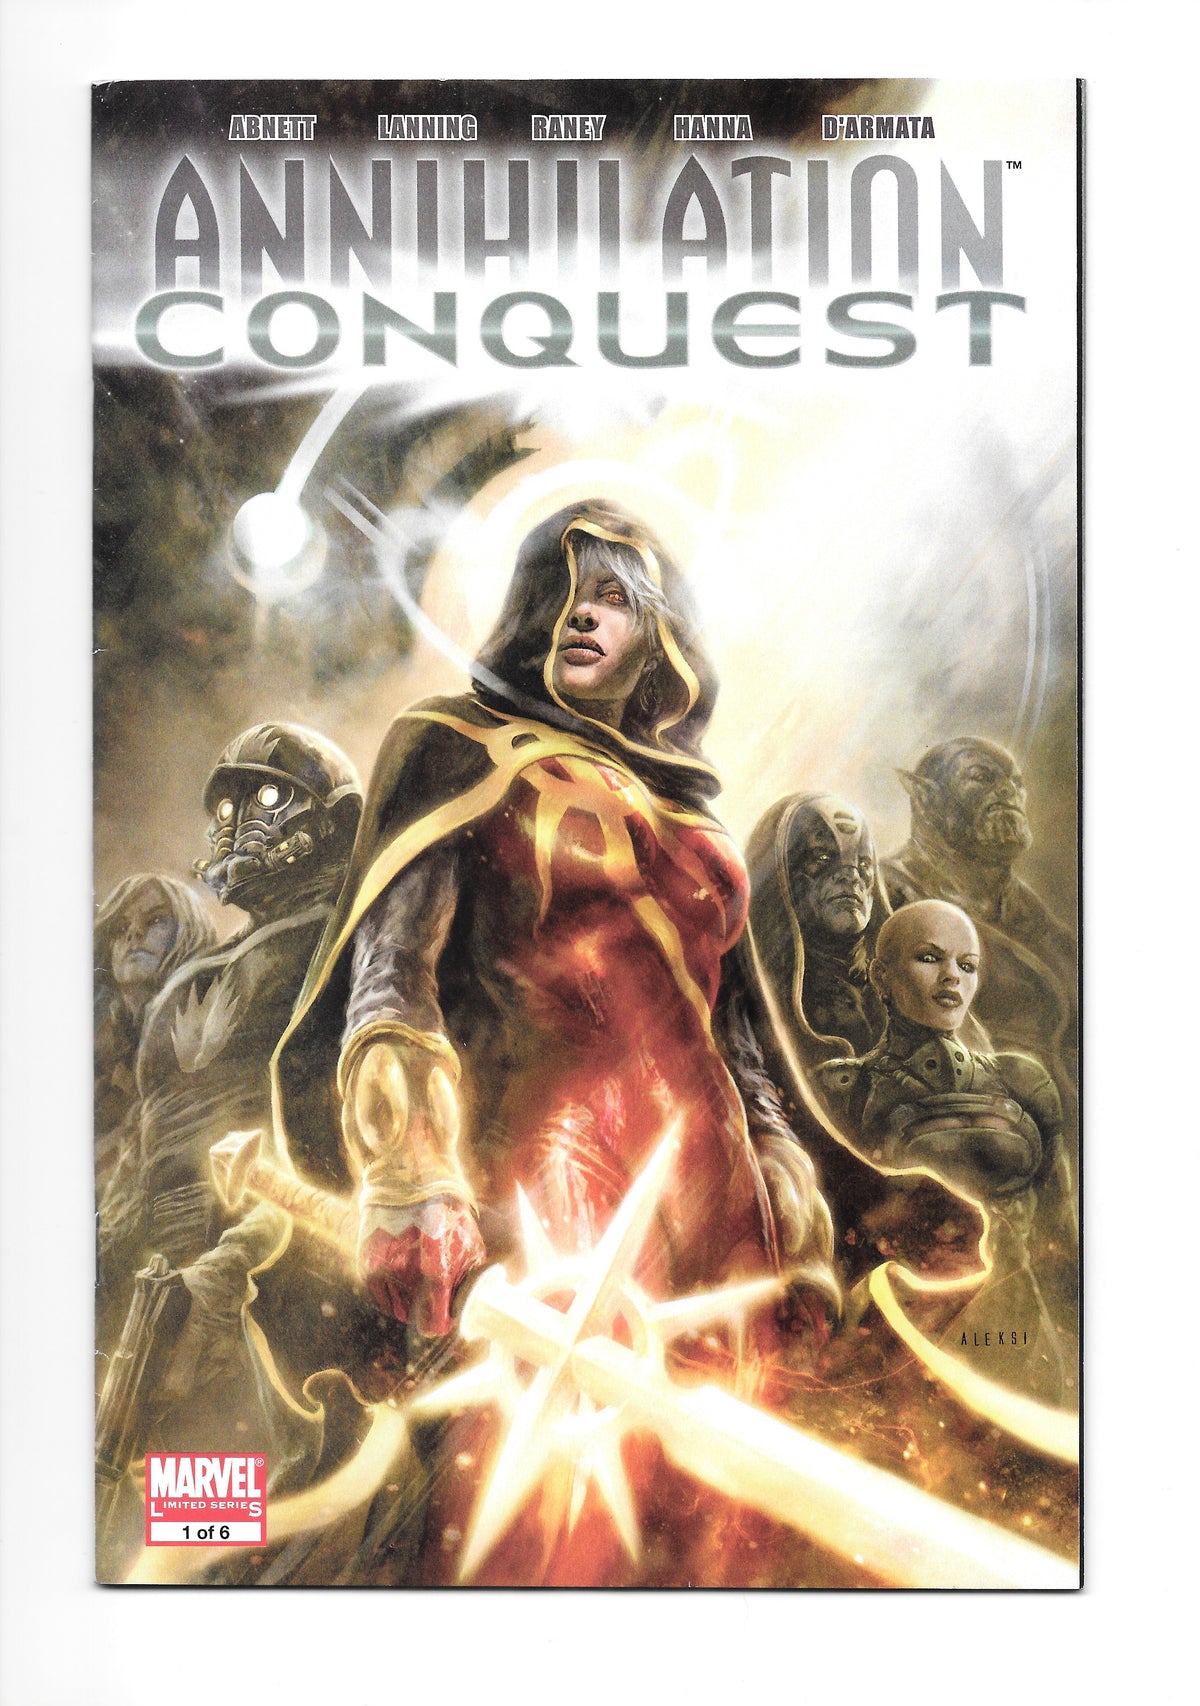 Photo of Annihilation Conquest Issue 1 (of 6) comic sold by Stronghold Collectibles